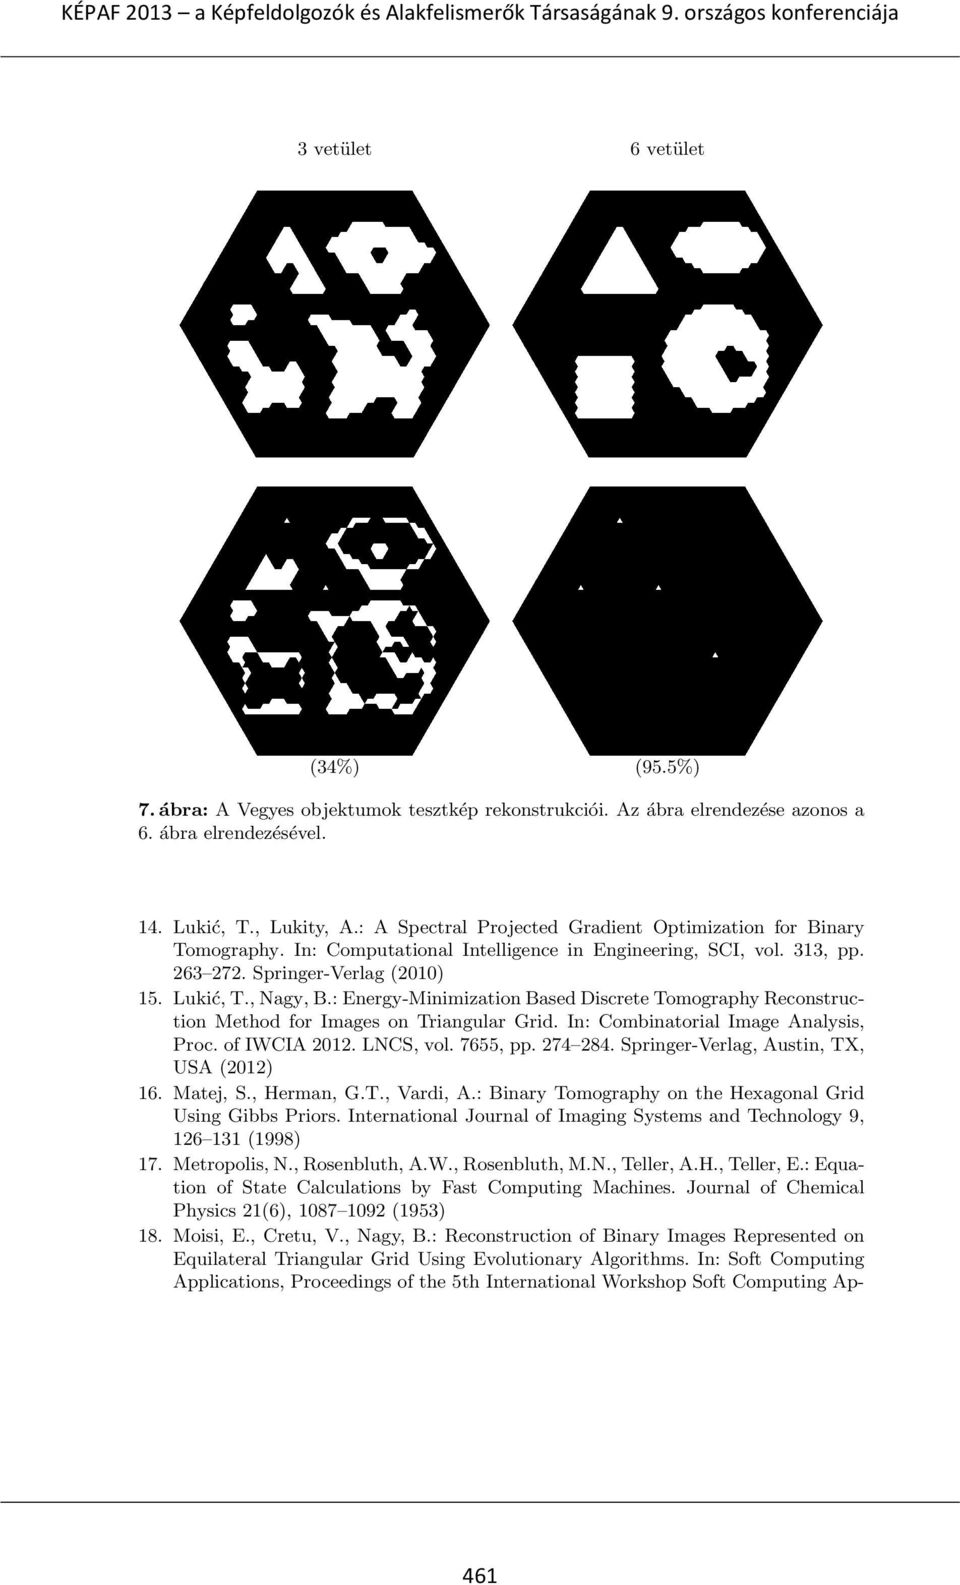 : Energy-Minimization Based Discrete Tomography Reconstruction Method for Images on Triangular Grid. In: Combinatorial Image Analysis, Proc. of IWCIA 2012. LNCS, vol. 7655, pp. 274 284.